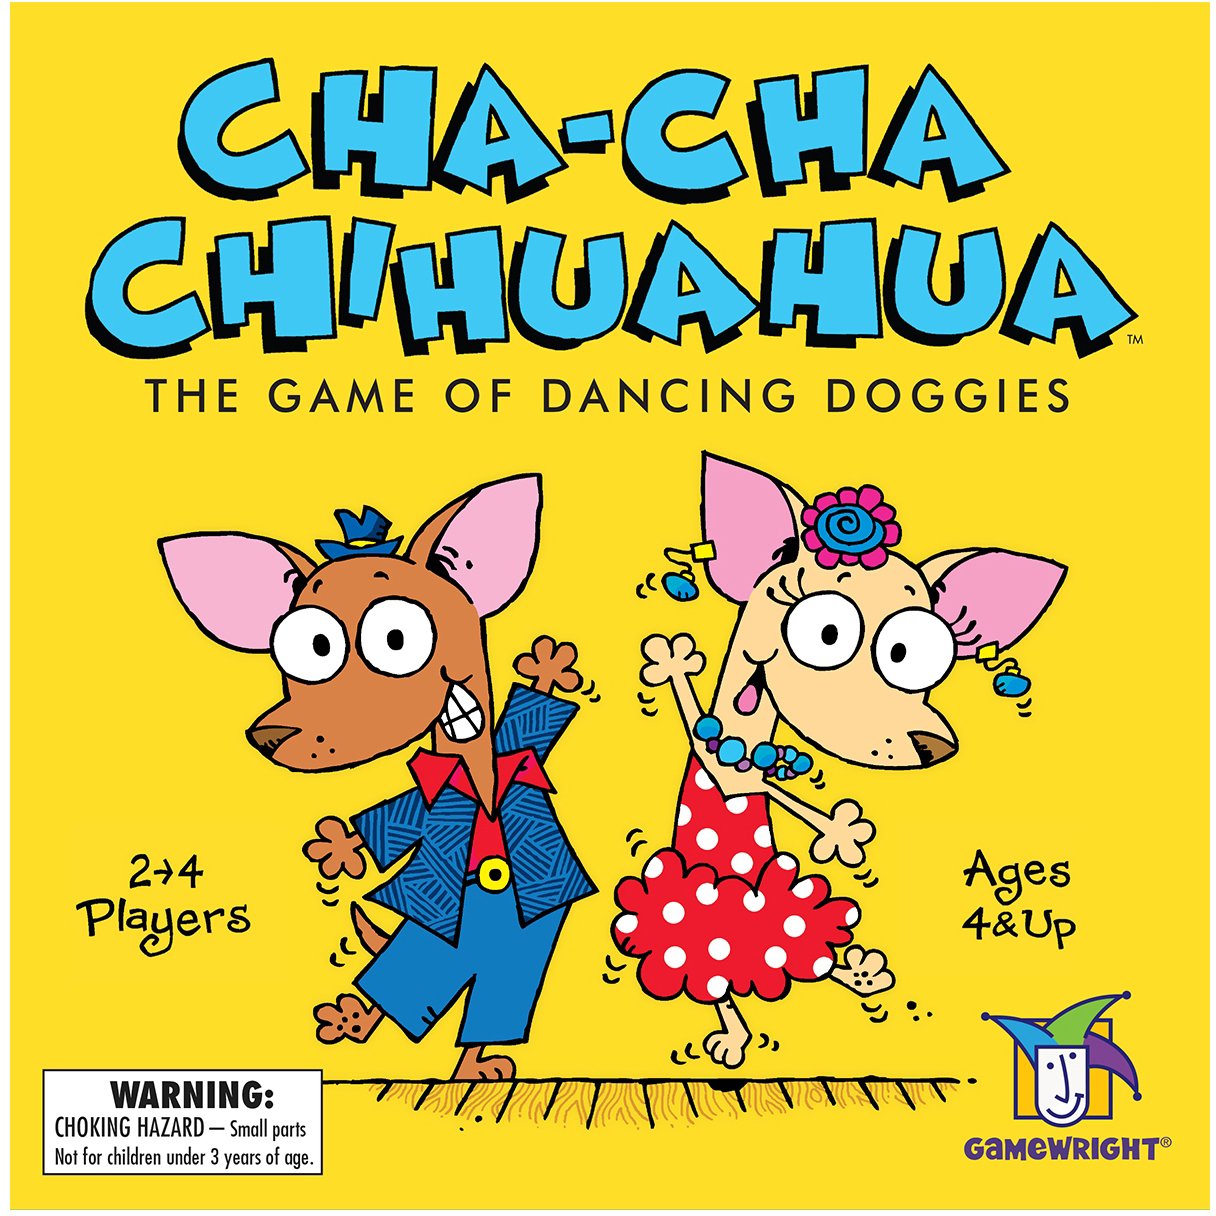 Gamewright Cha-Cha Chihuahua The Game of Dancing Doggies 通販 